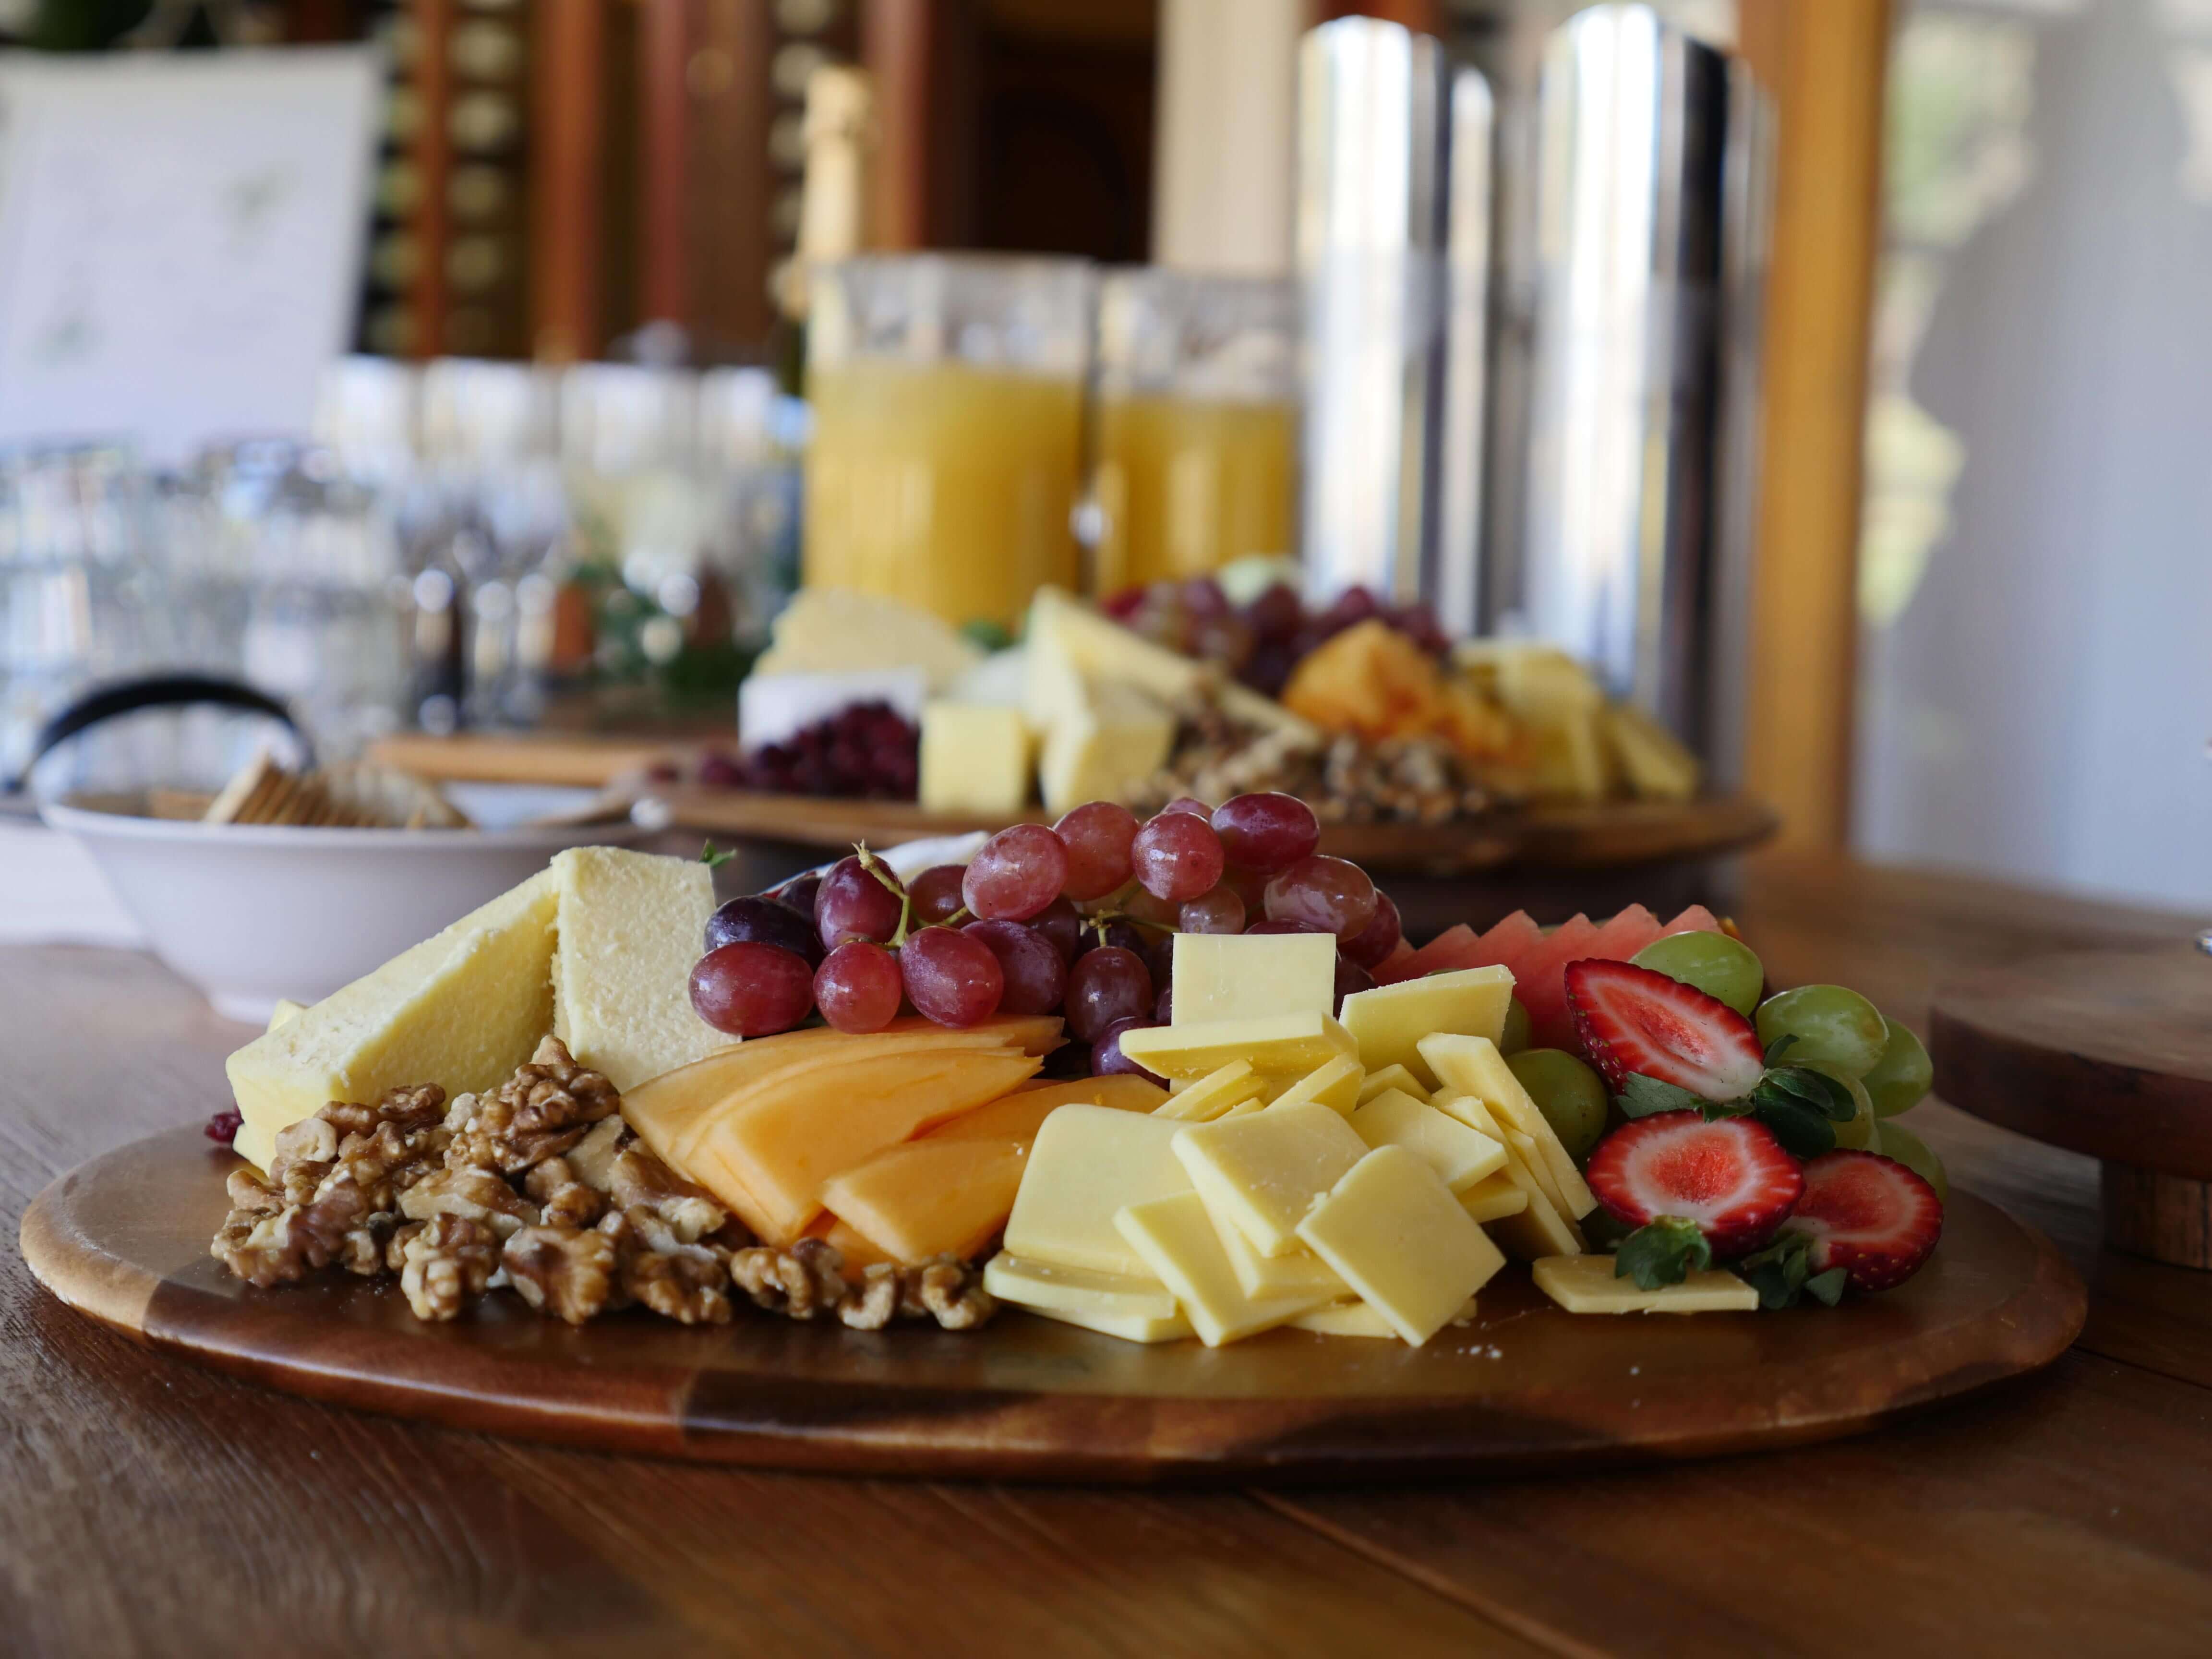 Our classic cheese board you can enjoy while soaking up the Mount Tamborine atmosphere.